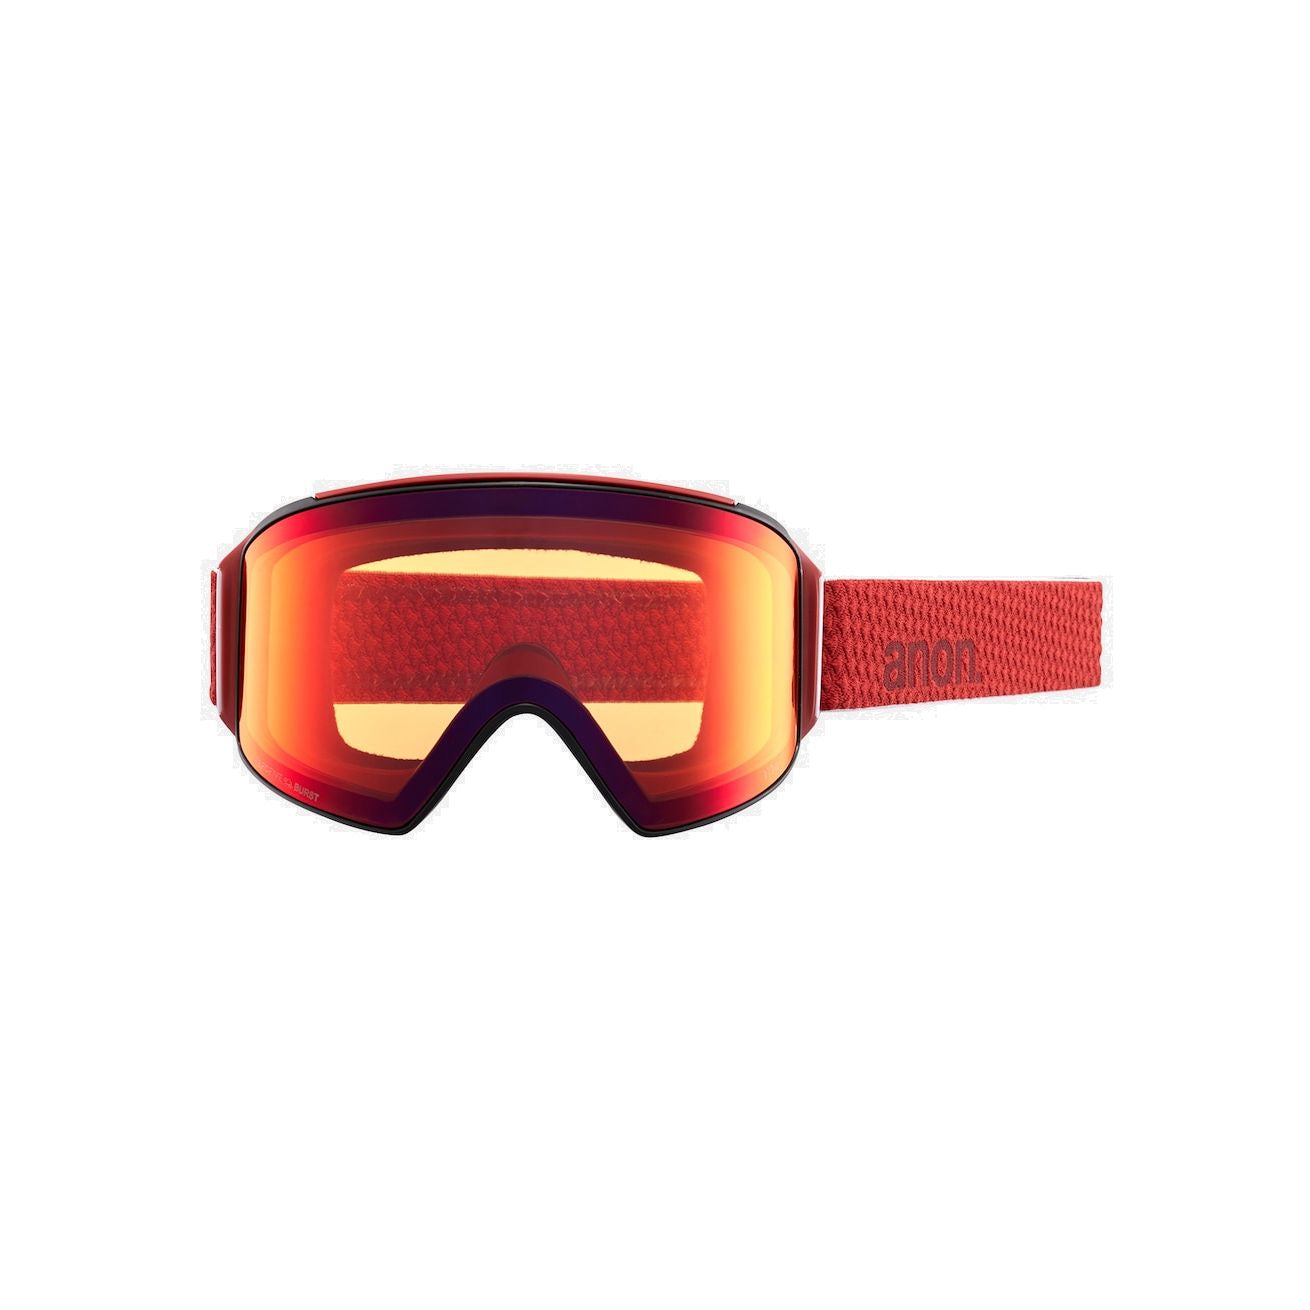 Anon M4 Cylindrical Goggles + Bonus Lens + MFI Face Mask - Low Bridge Fit - Openbox Mars Perceive Sunny Red Snow Goggles